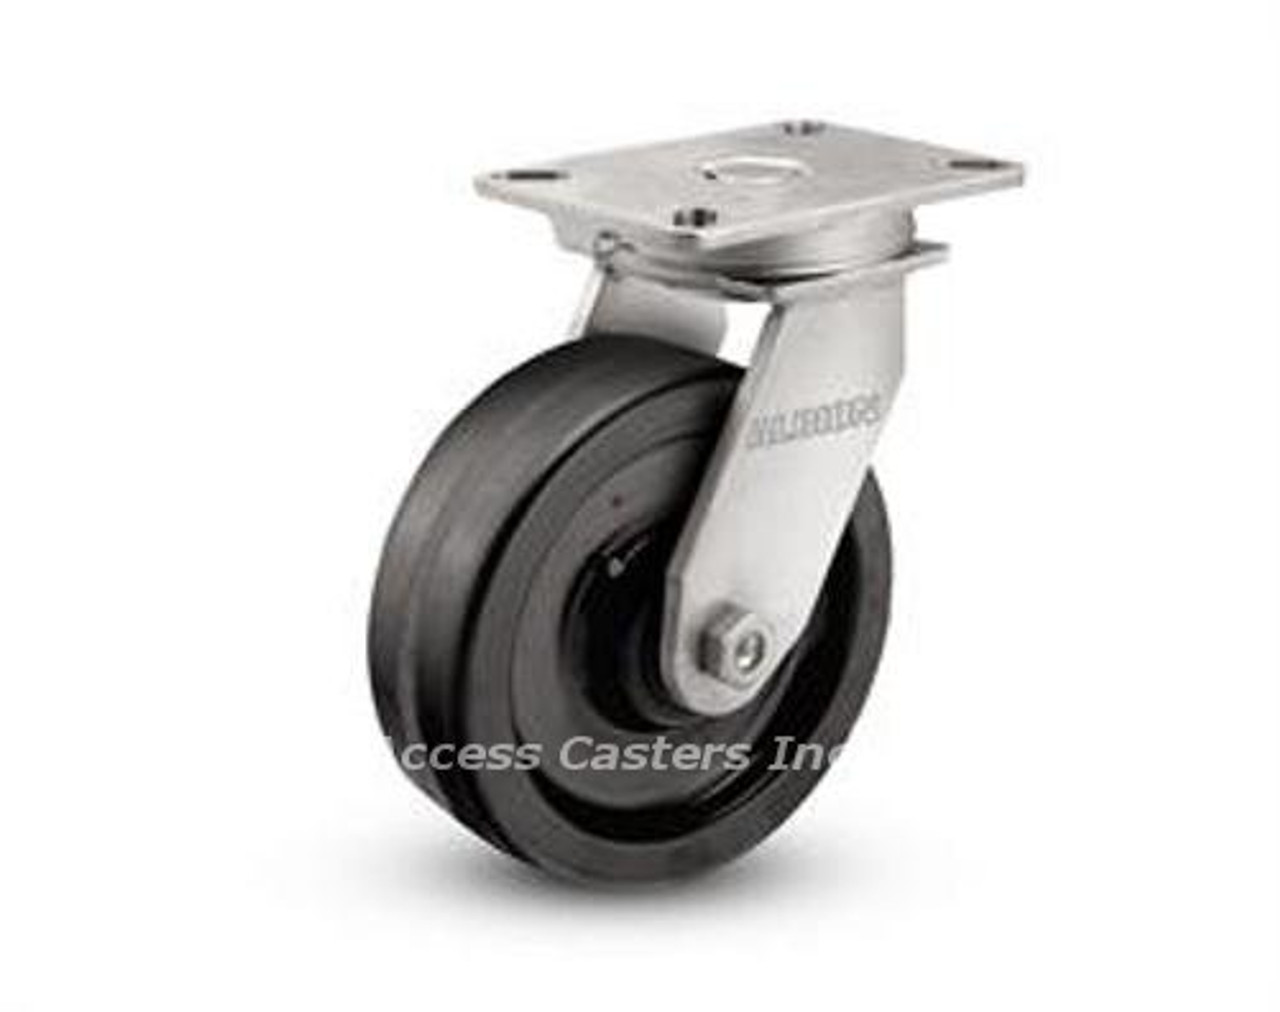 Picture shows caster with 10" x 3" wheel.